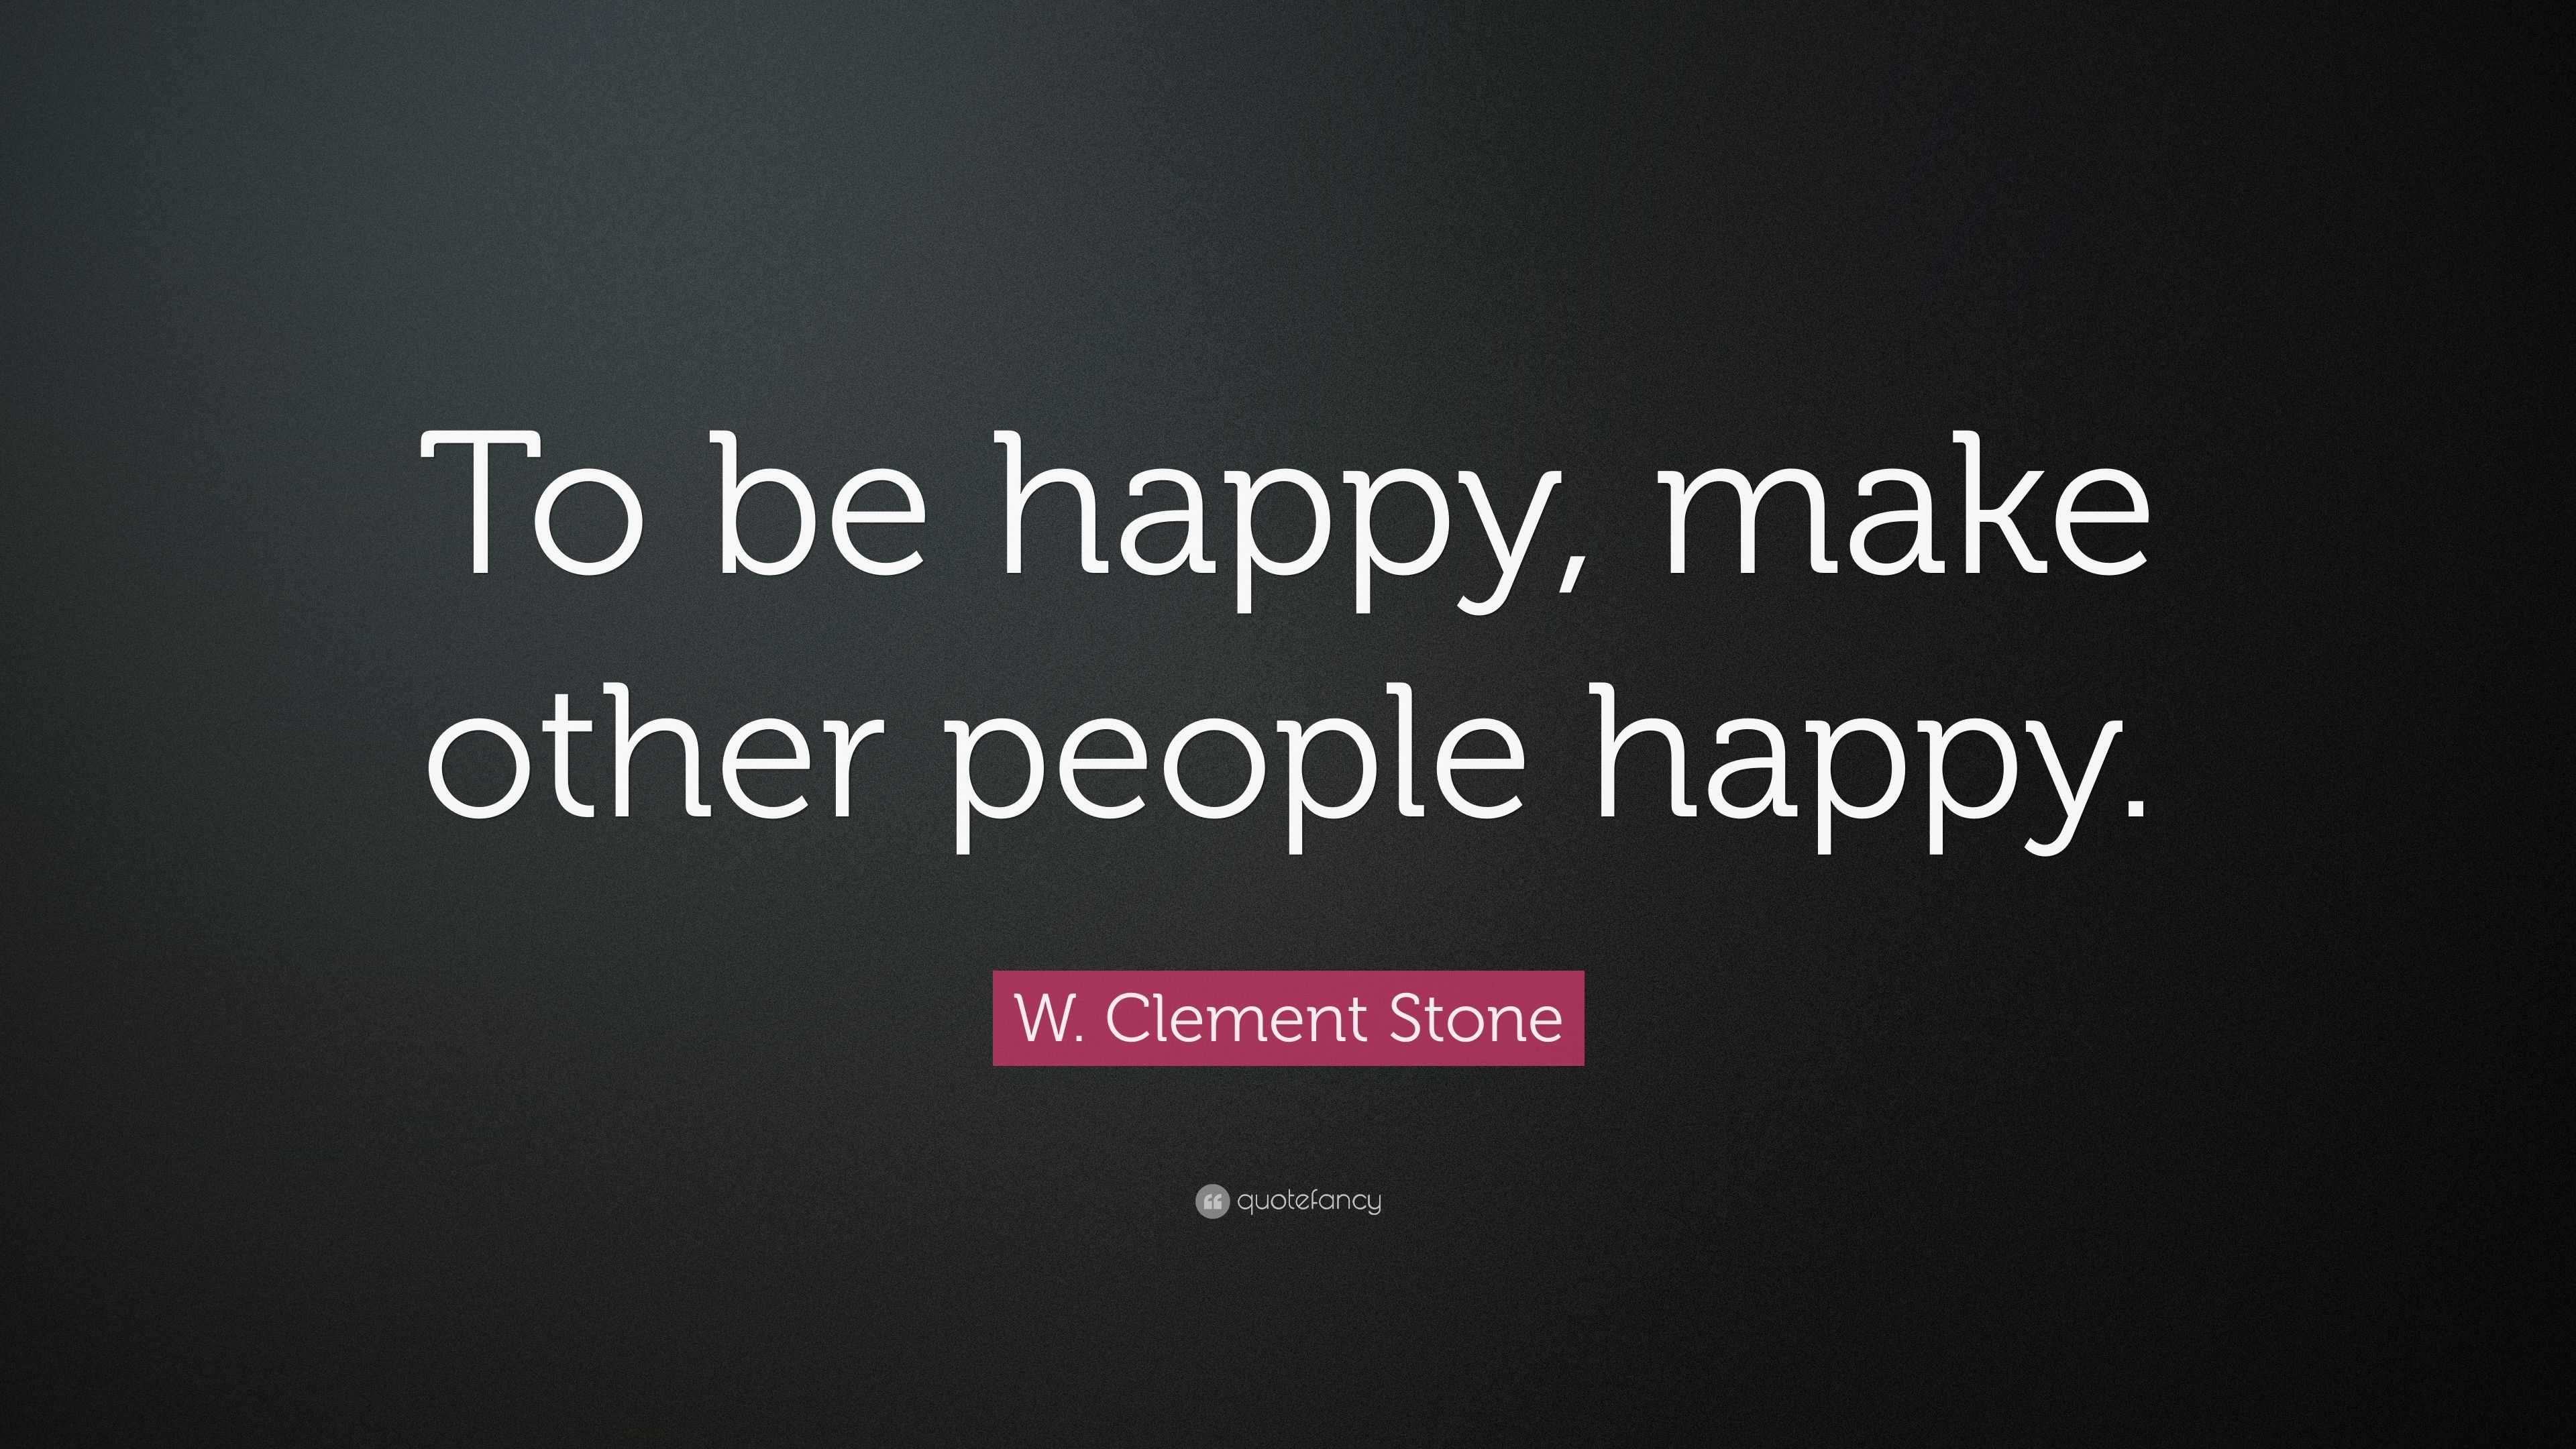 W. Clement Stone Quote: “To be happy, make other people happy.”